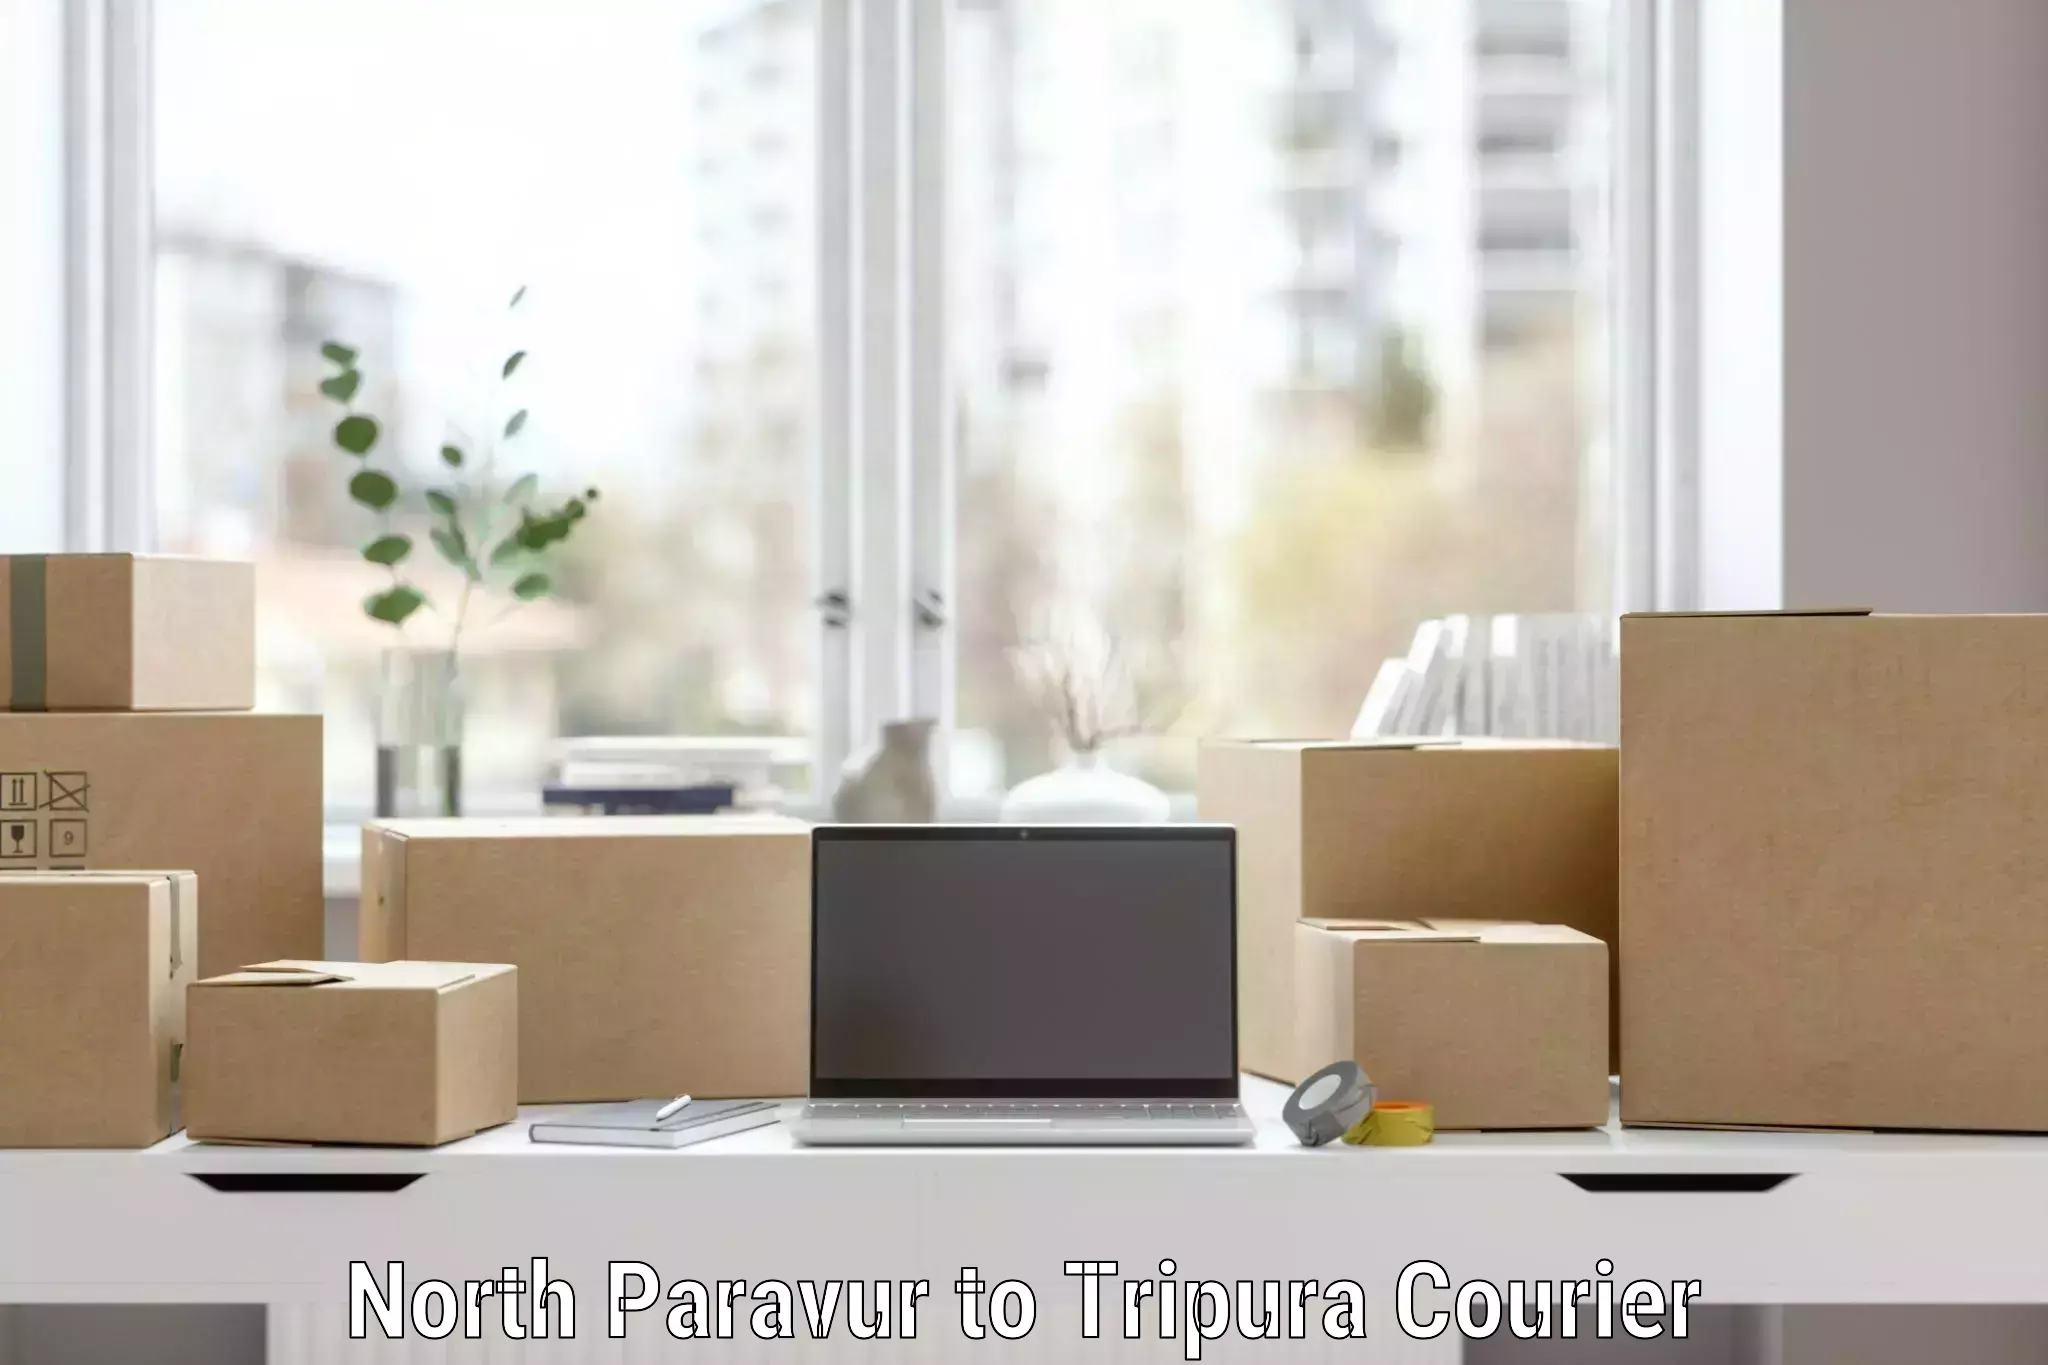 Trusted moving company in North Paravur to North Tripura